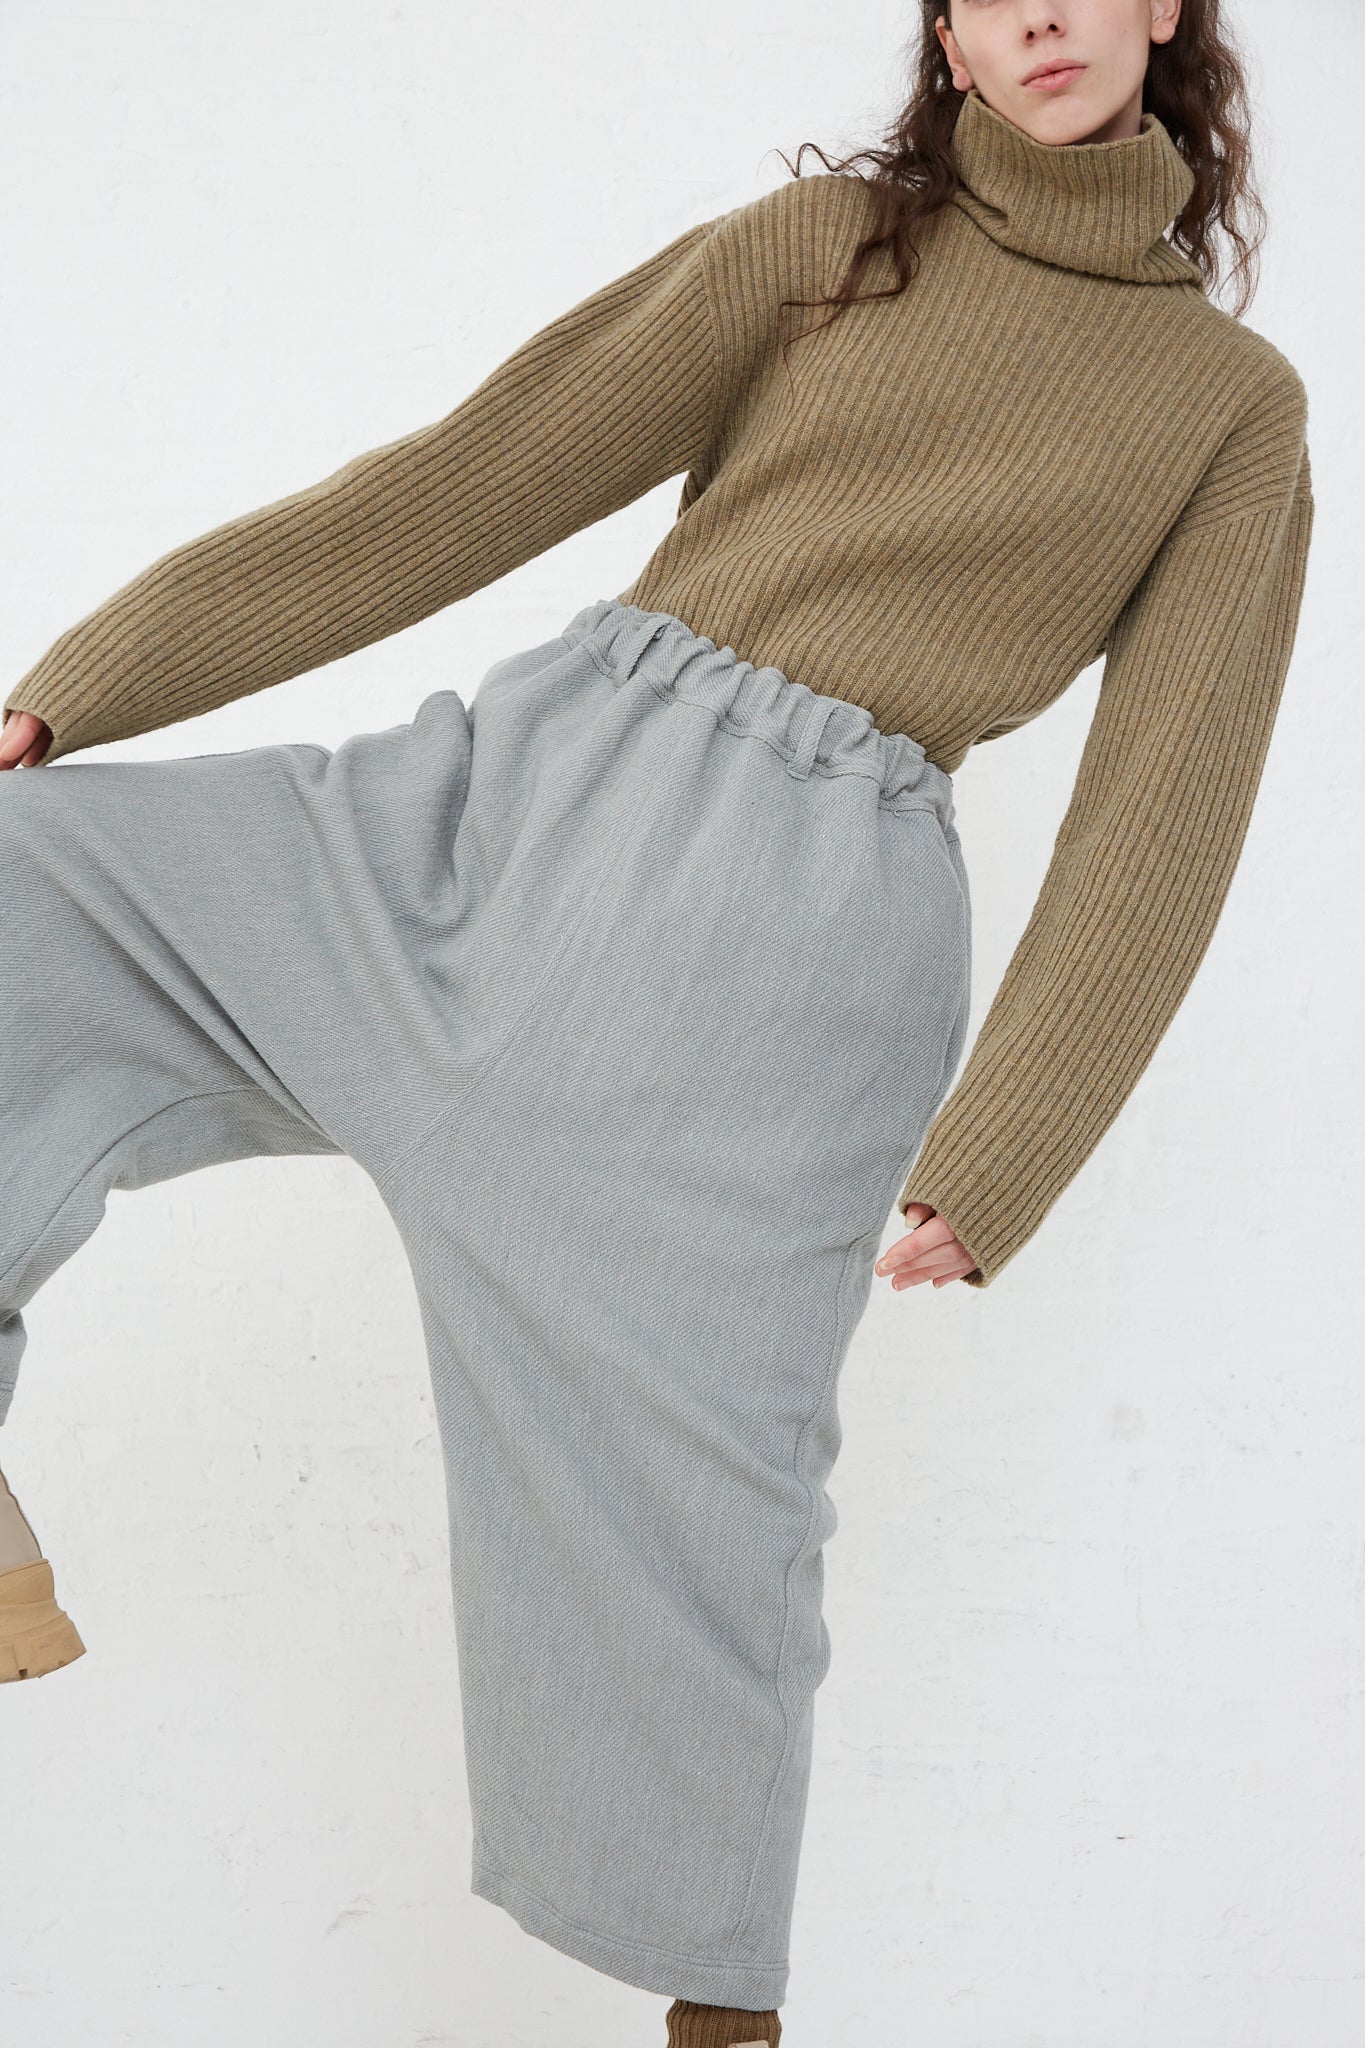 The model is wearing a turtle neck sweater and grey wide leg pants made of Merino Wool Orihimedaki Pant in Blue by Ichi Antiquités.